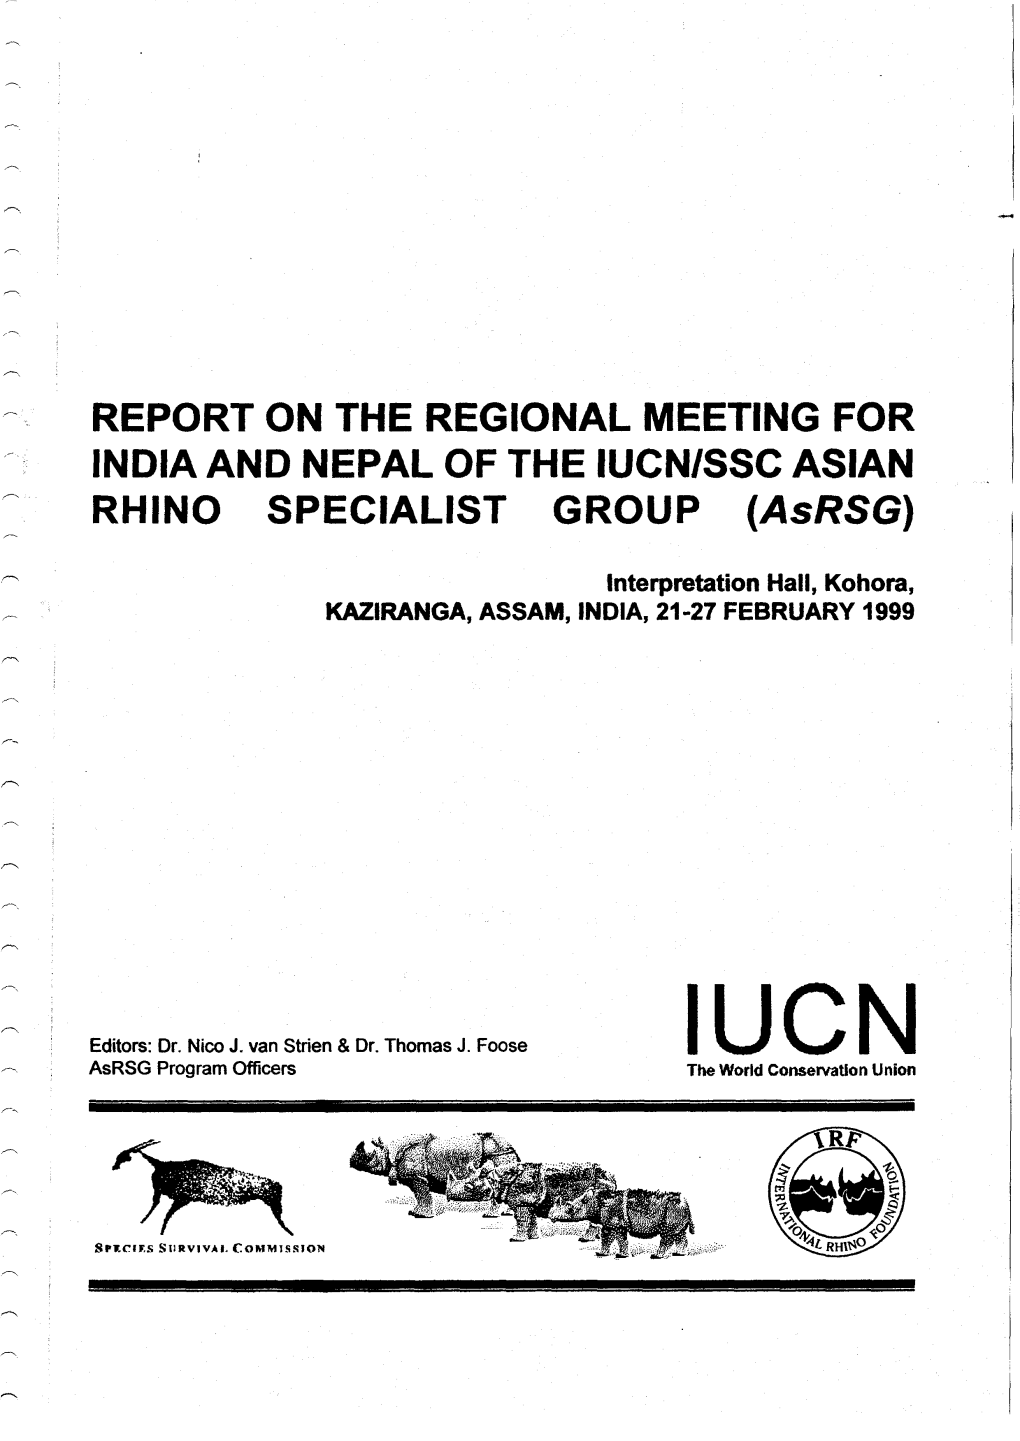 REPORT on the REGIONAL MEETING for INDIA and NEPAL of the IUCN/SSC ASIA N RHINO SPECIALIST GROUP (Asrsg)